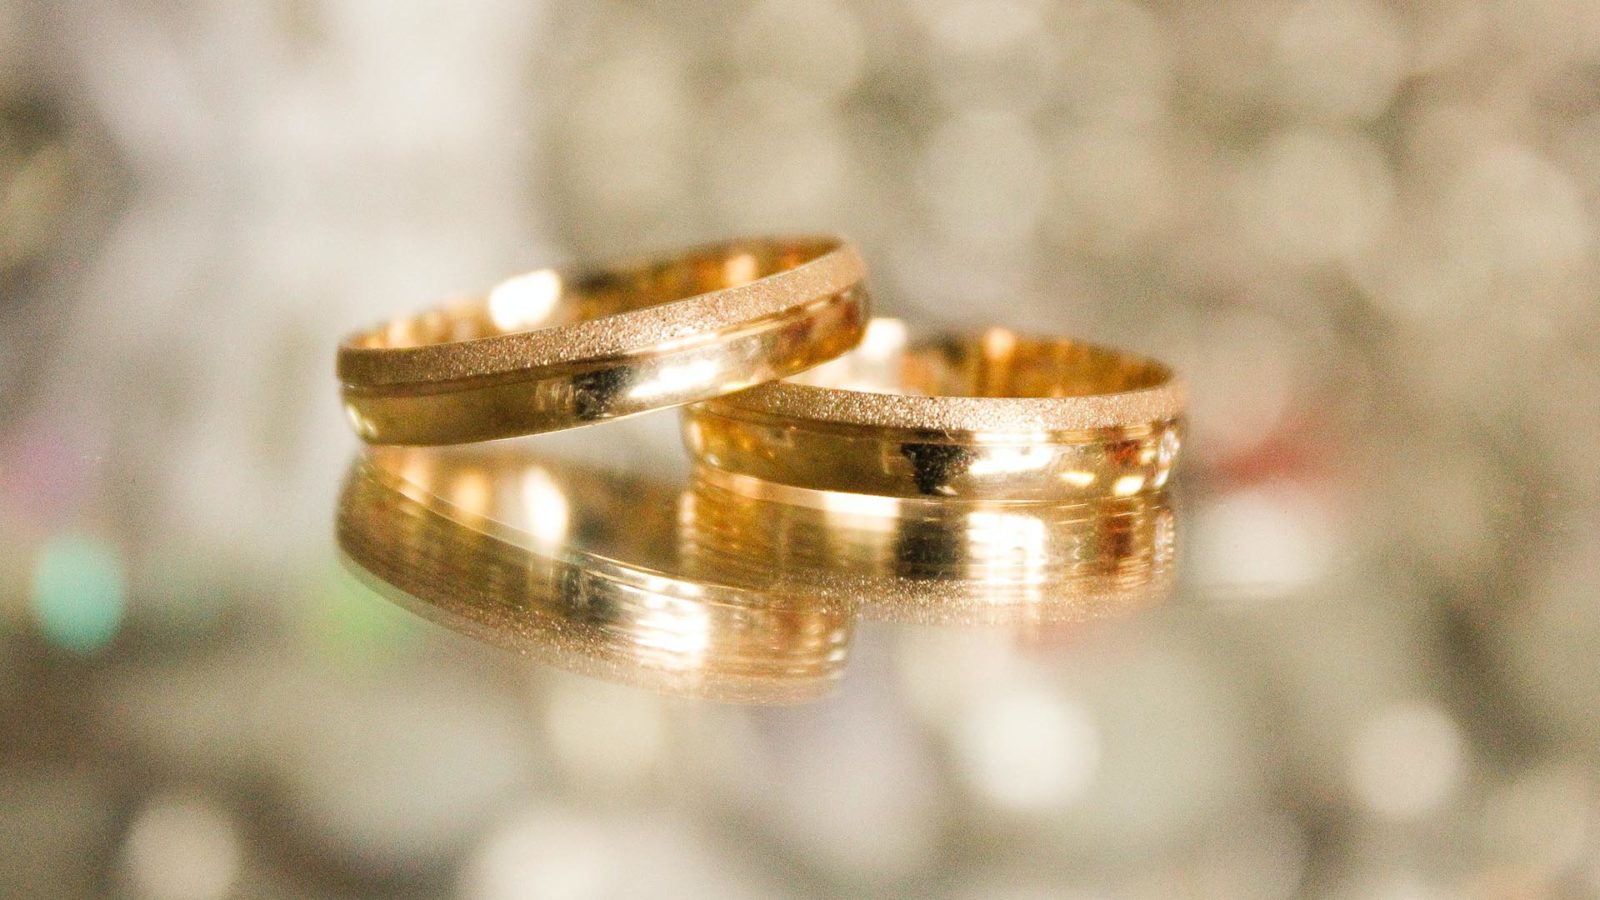 two gold wedding bands